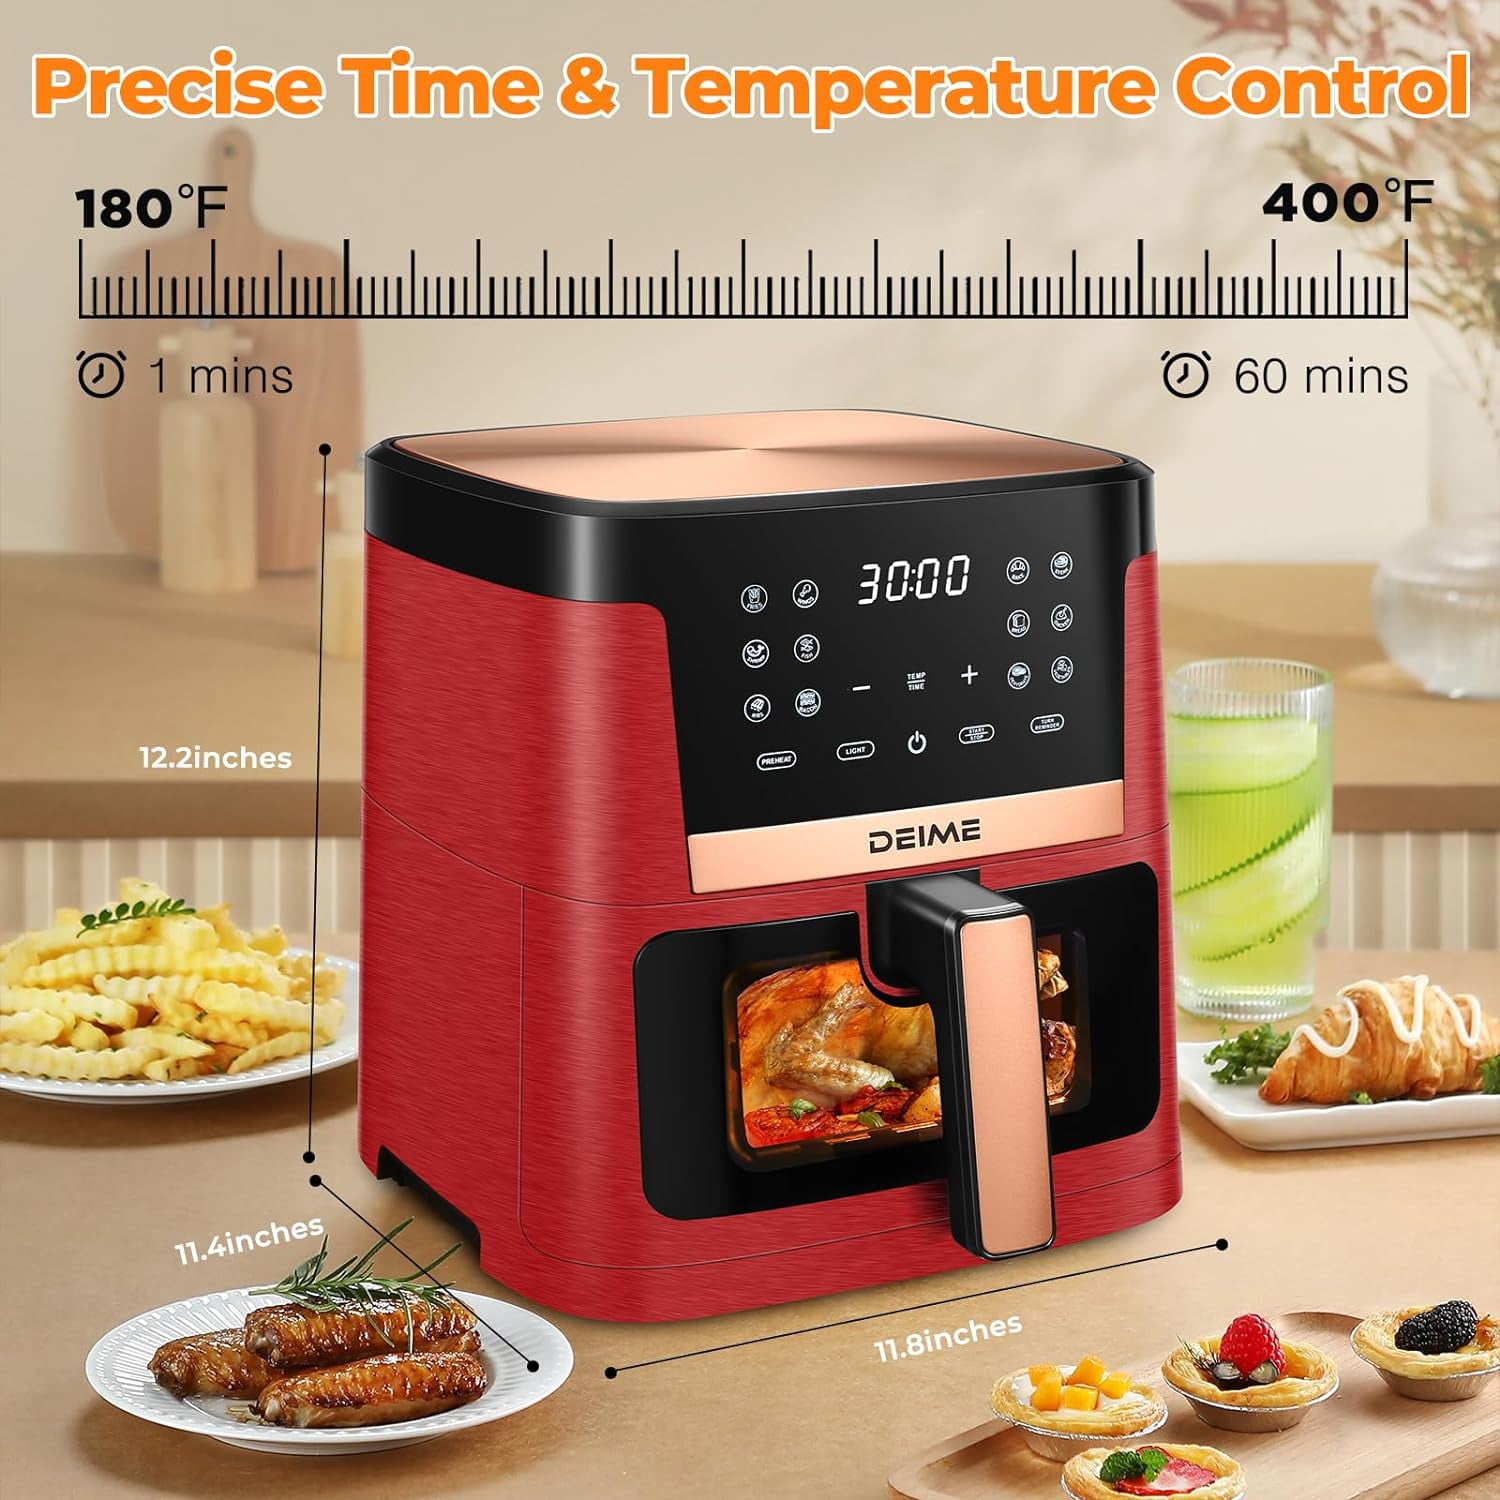 Home Air Fryer Oven Multifunctional Visible Fryer 3L Large Capacity French  Fries Maker Freidora De Aire Sin Aceite - AliExpress